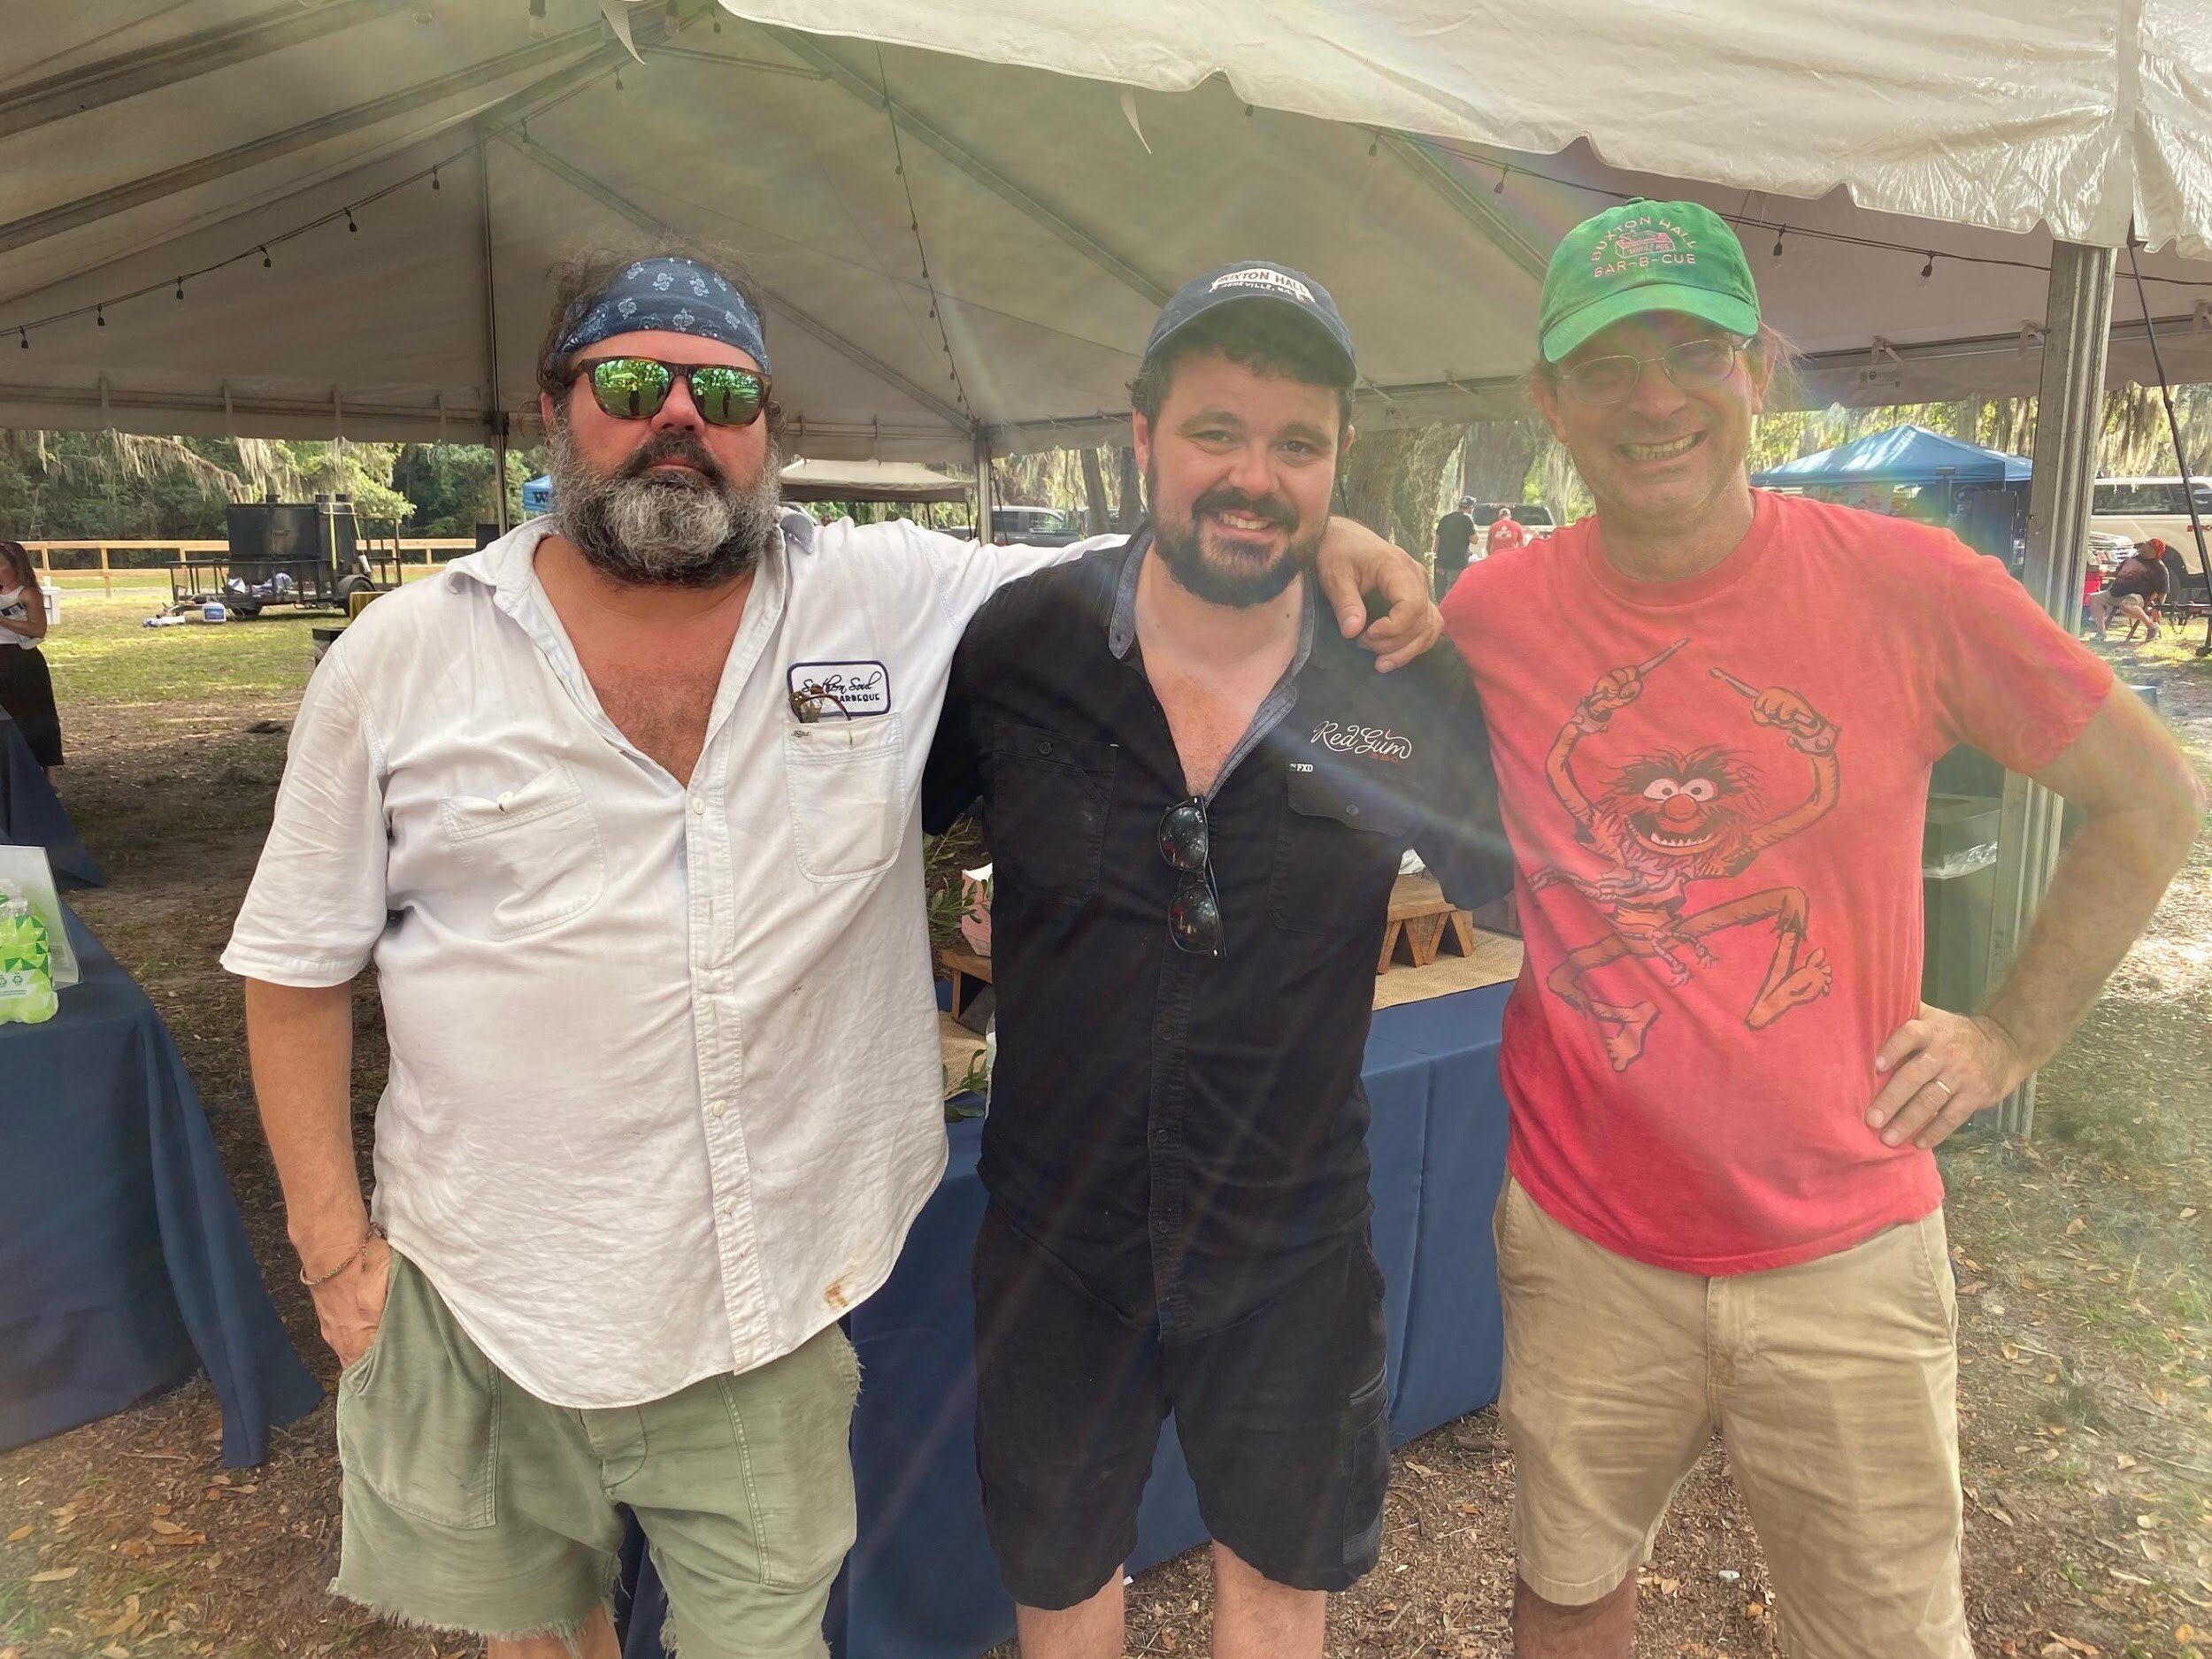 These guys are the OG’s, humble and caring. The nicest gents in BBQ, Harrison and Griffin of Southern Soul BBQ.